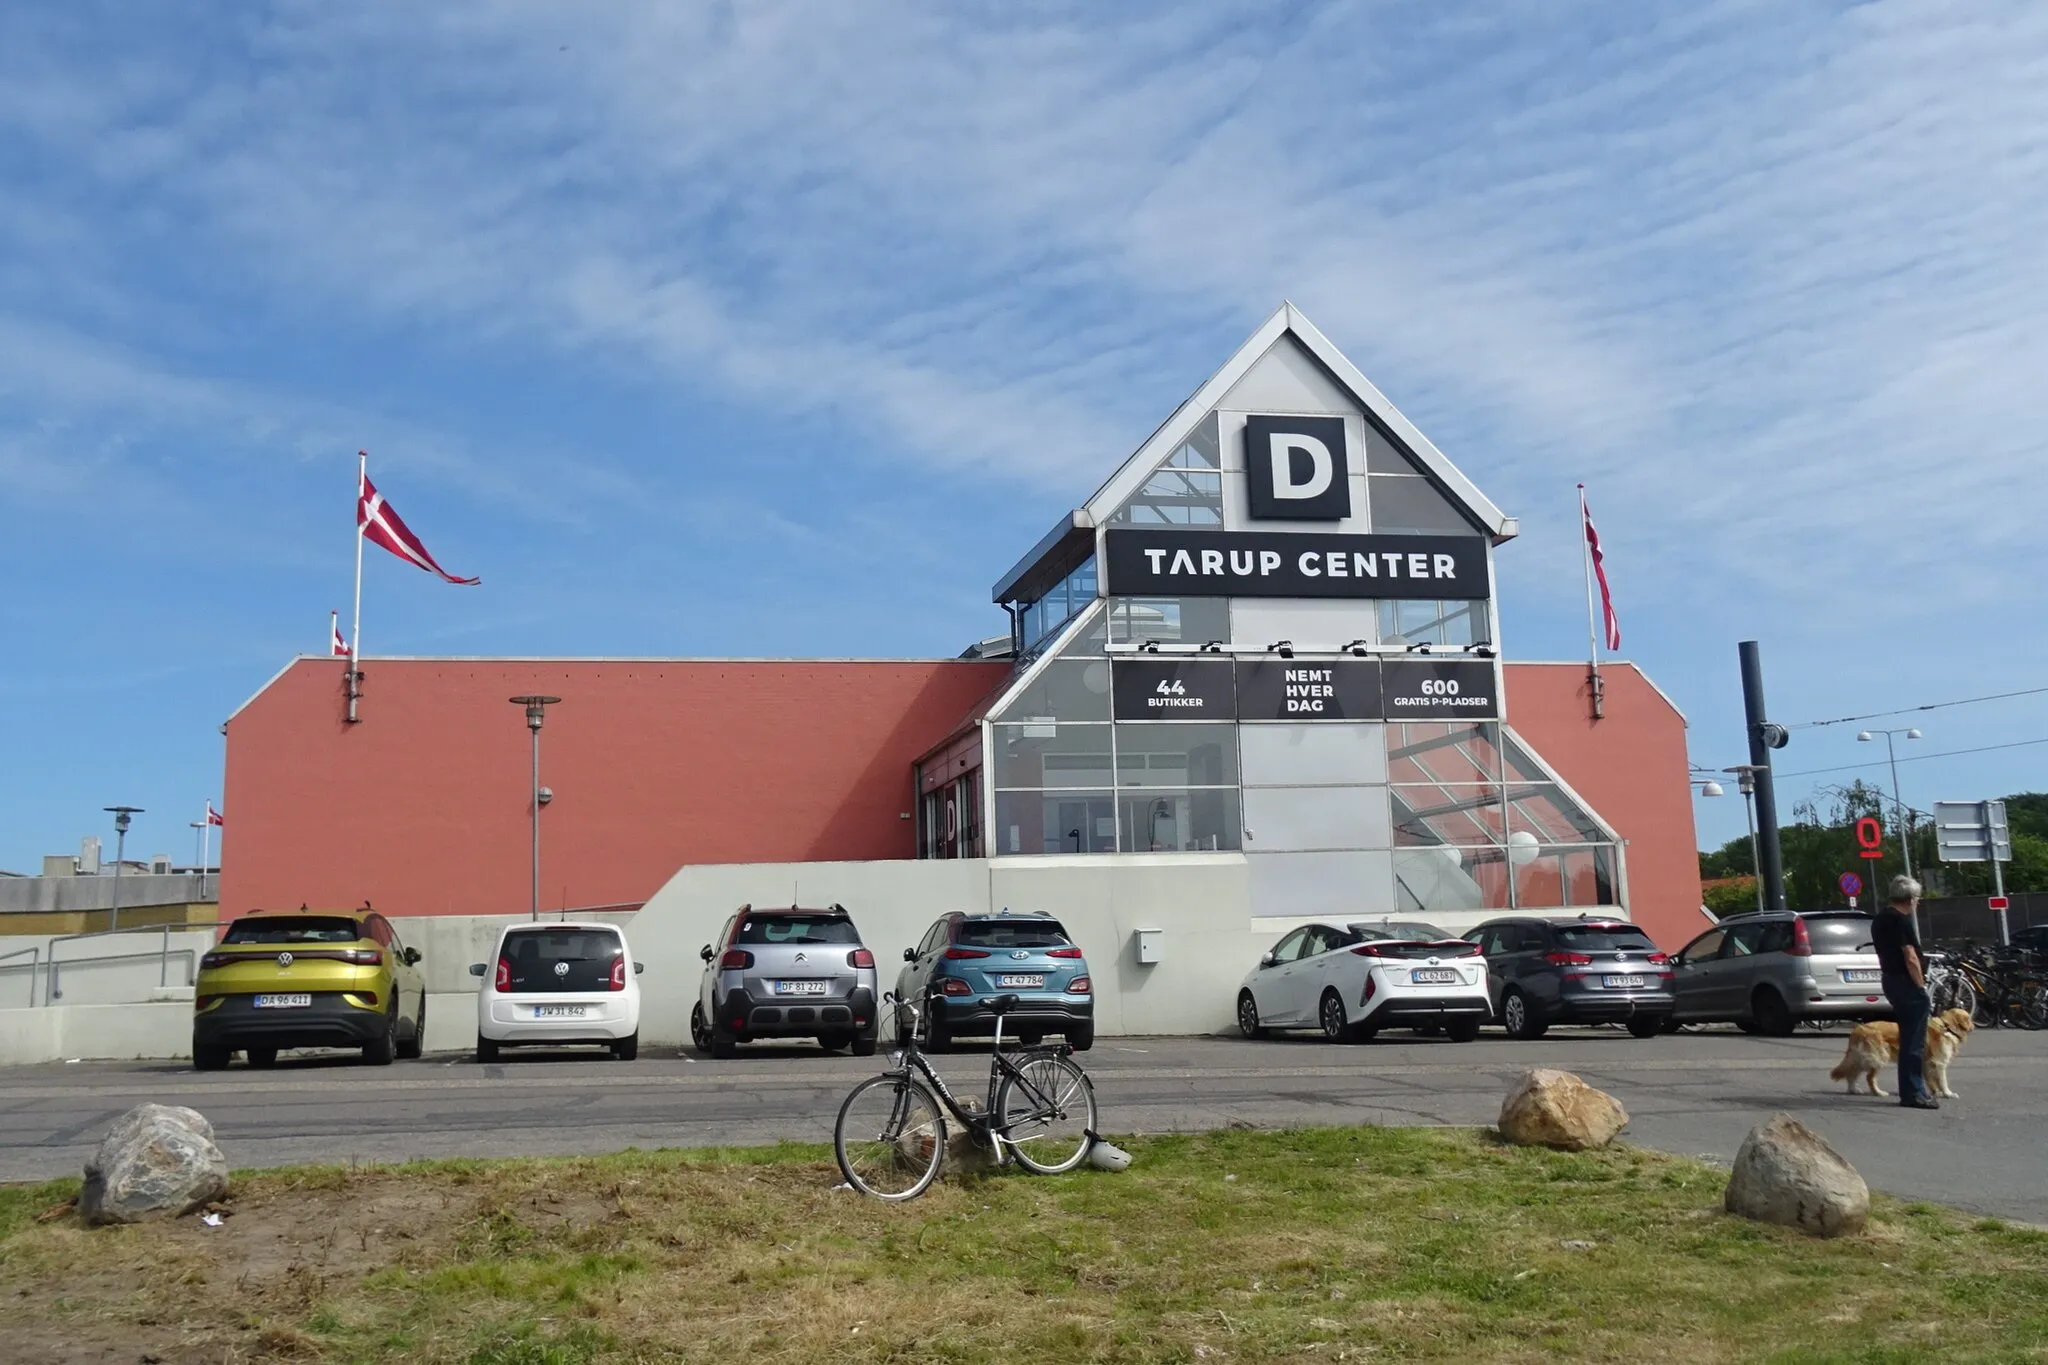 Photo showing: The shopping center Tarup Center in Odense in Denmark.